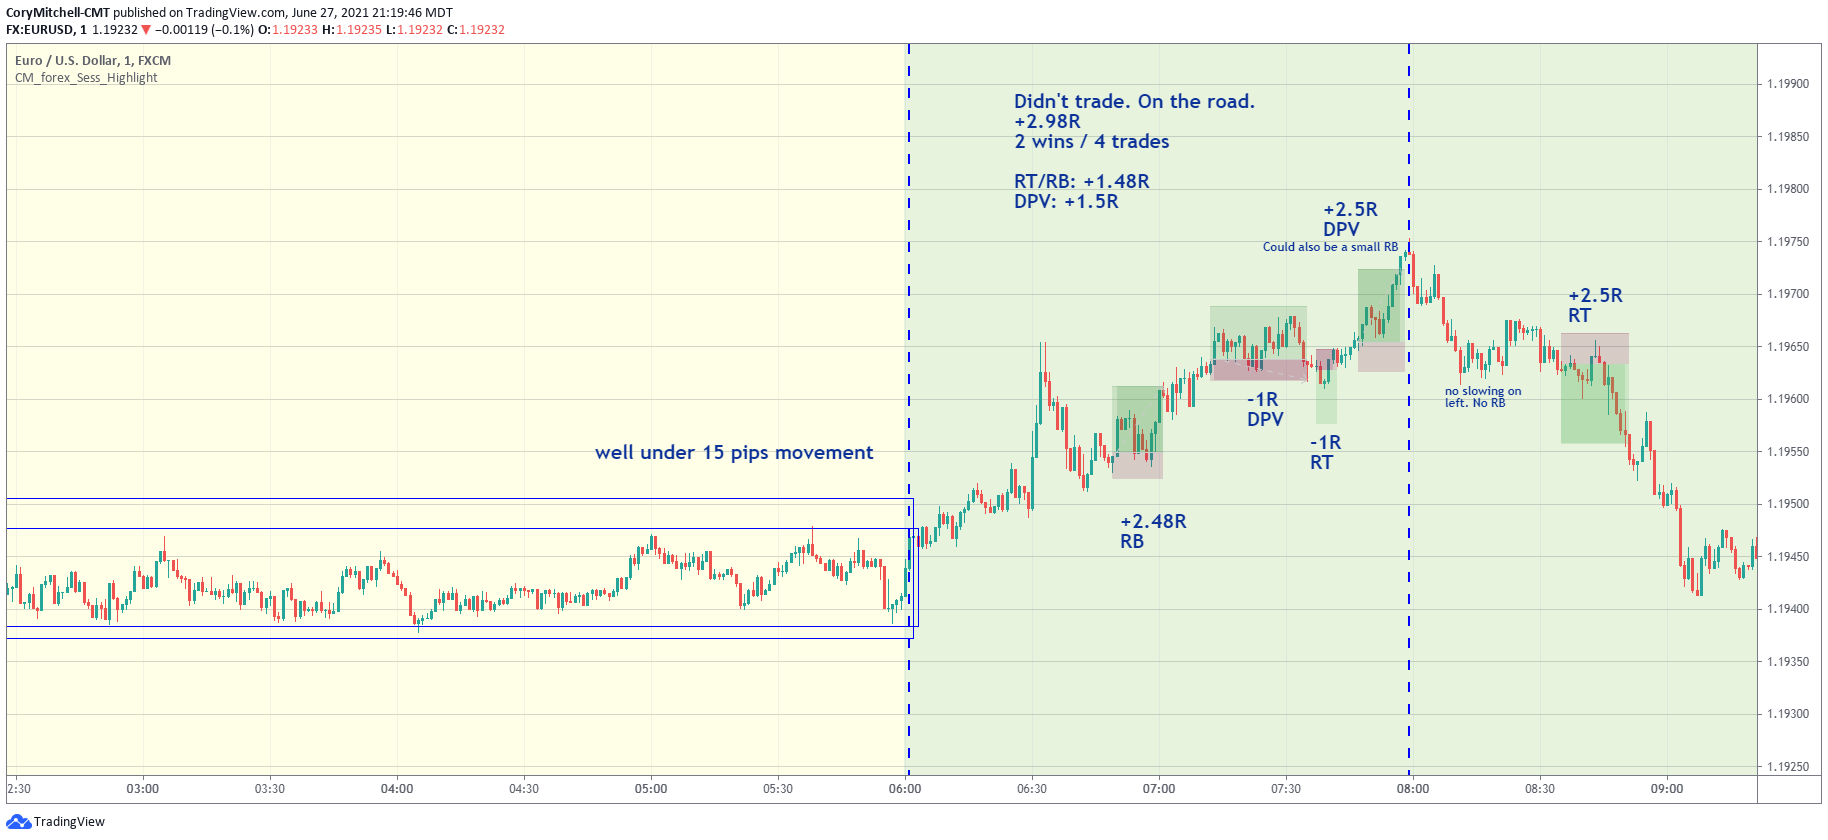 EURUSD day trading strategy trade examples June 25